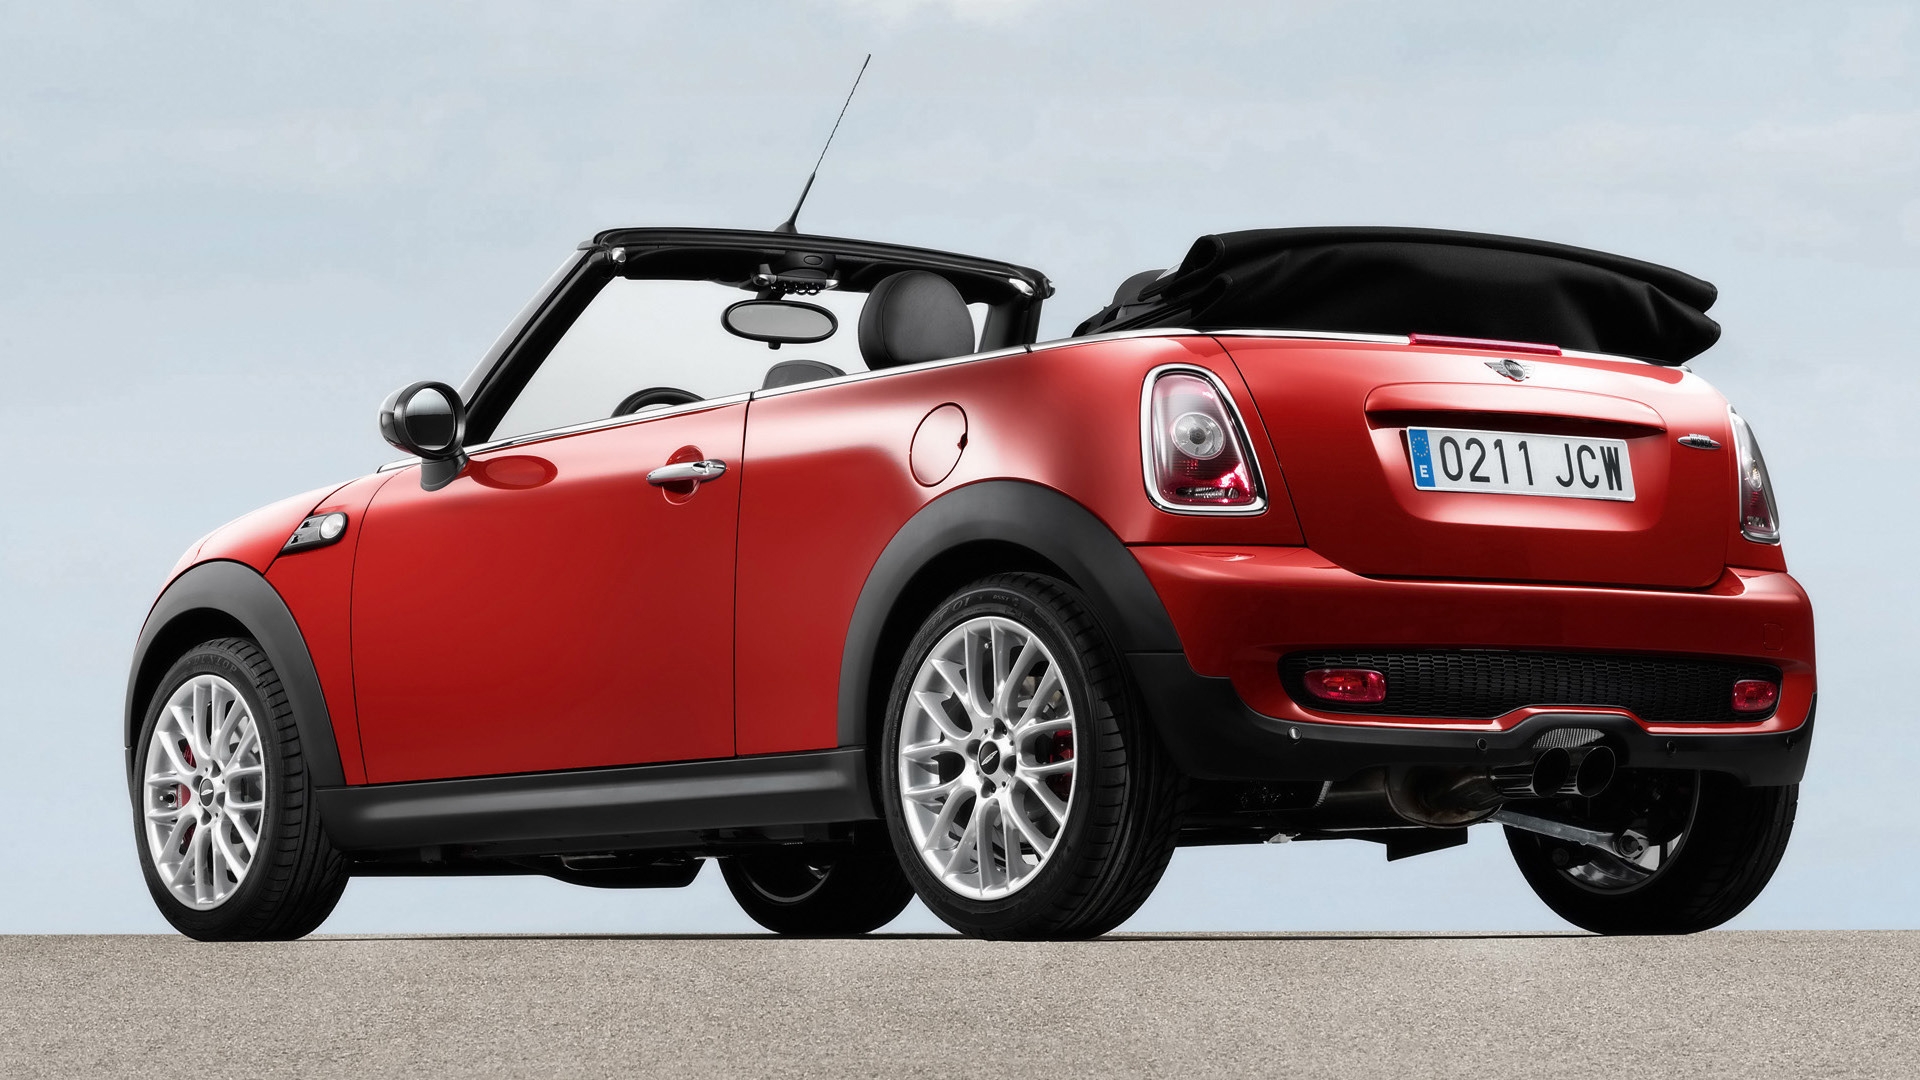 Mini Cooper Convertible Rear And Side for 1920 x 1080 HDTV 1080p resolution